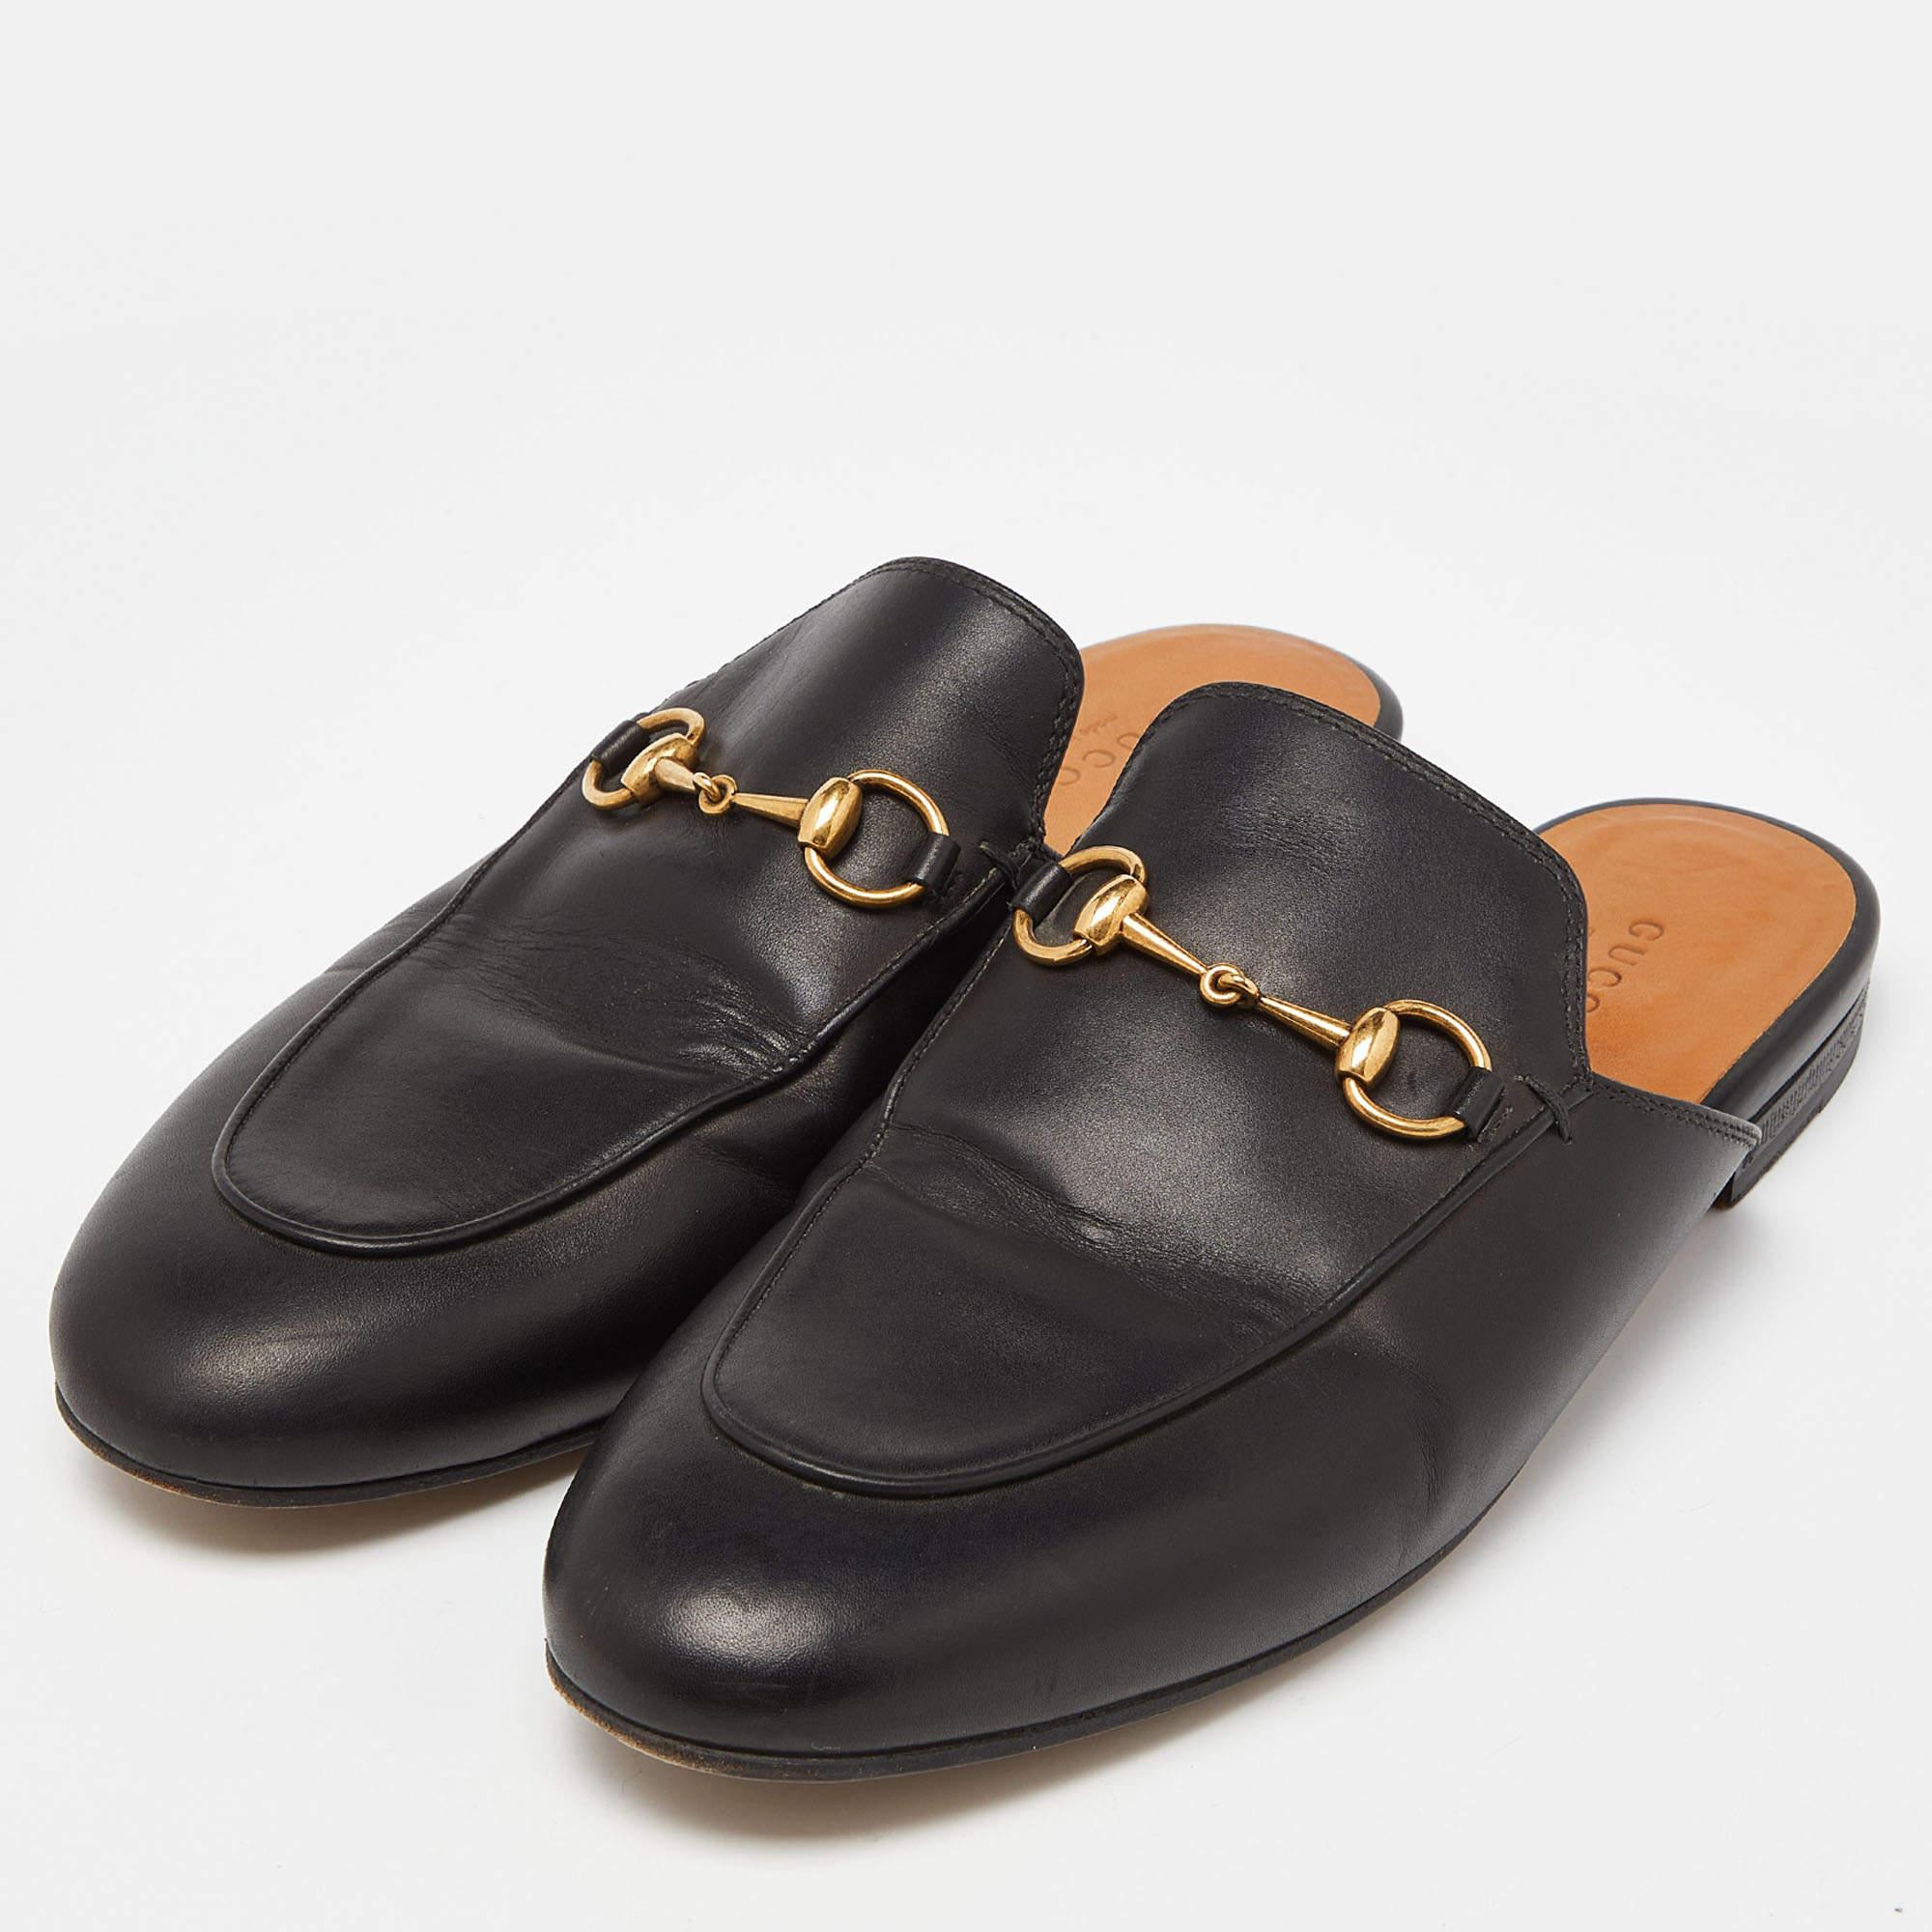 Gucci Black Leather Princetown Mules Size 39 4